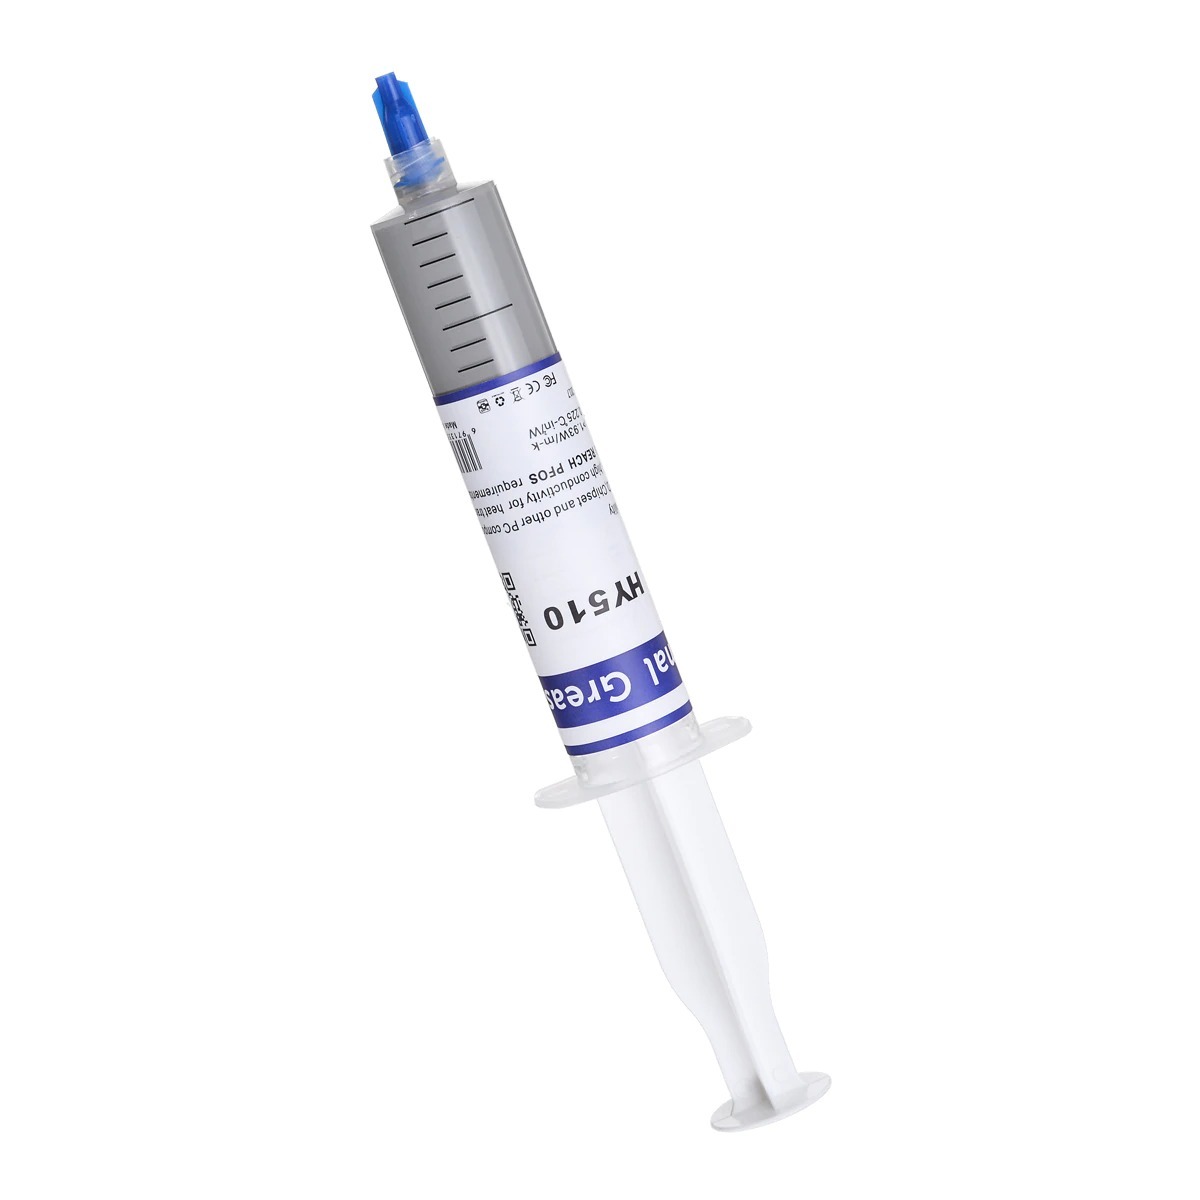 [30g] HY510 CPU grease silicon grease .. for thermal grease heat sink new goods [ gray ]